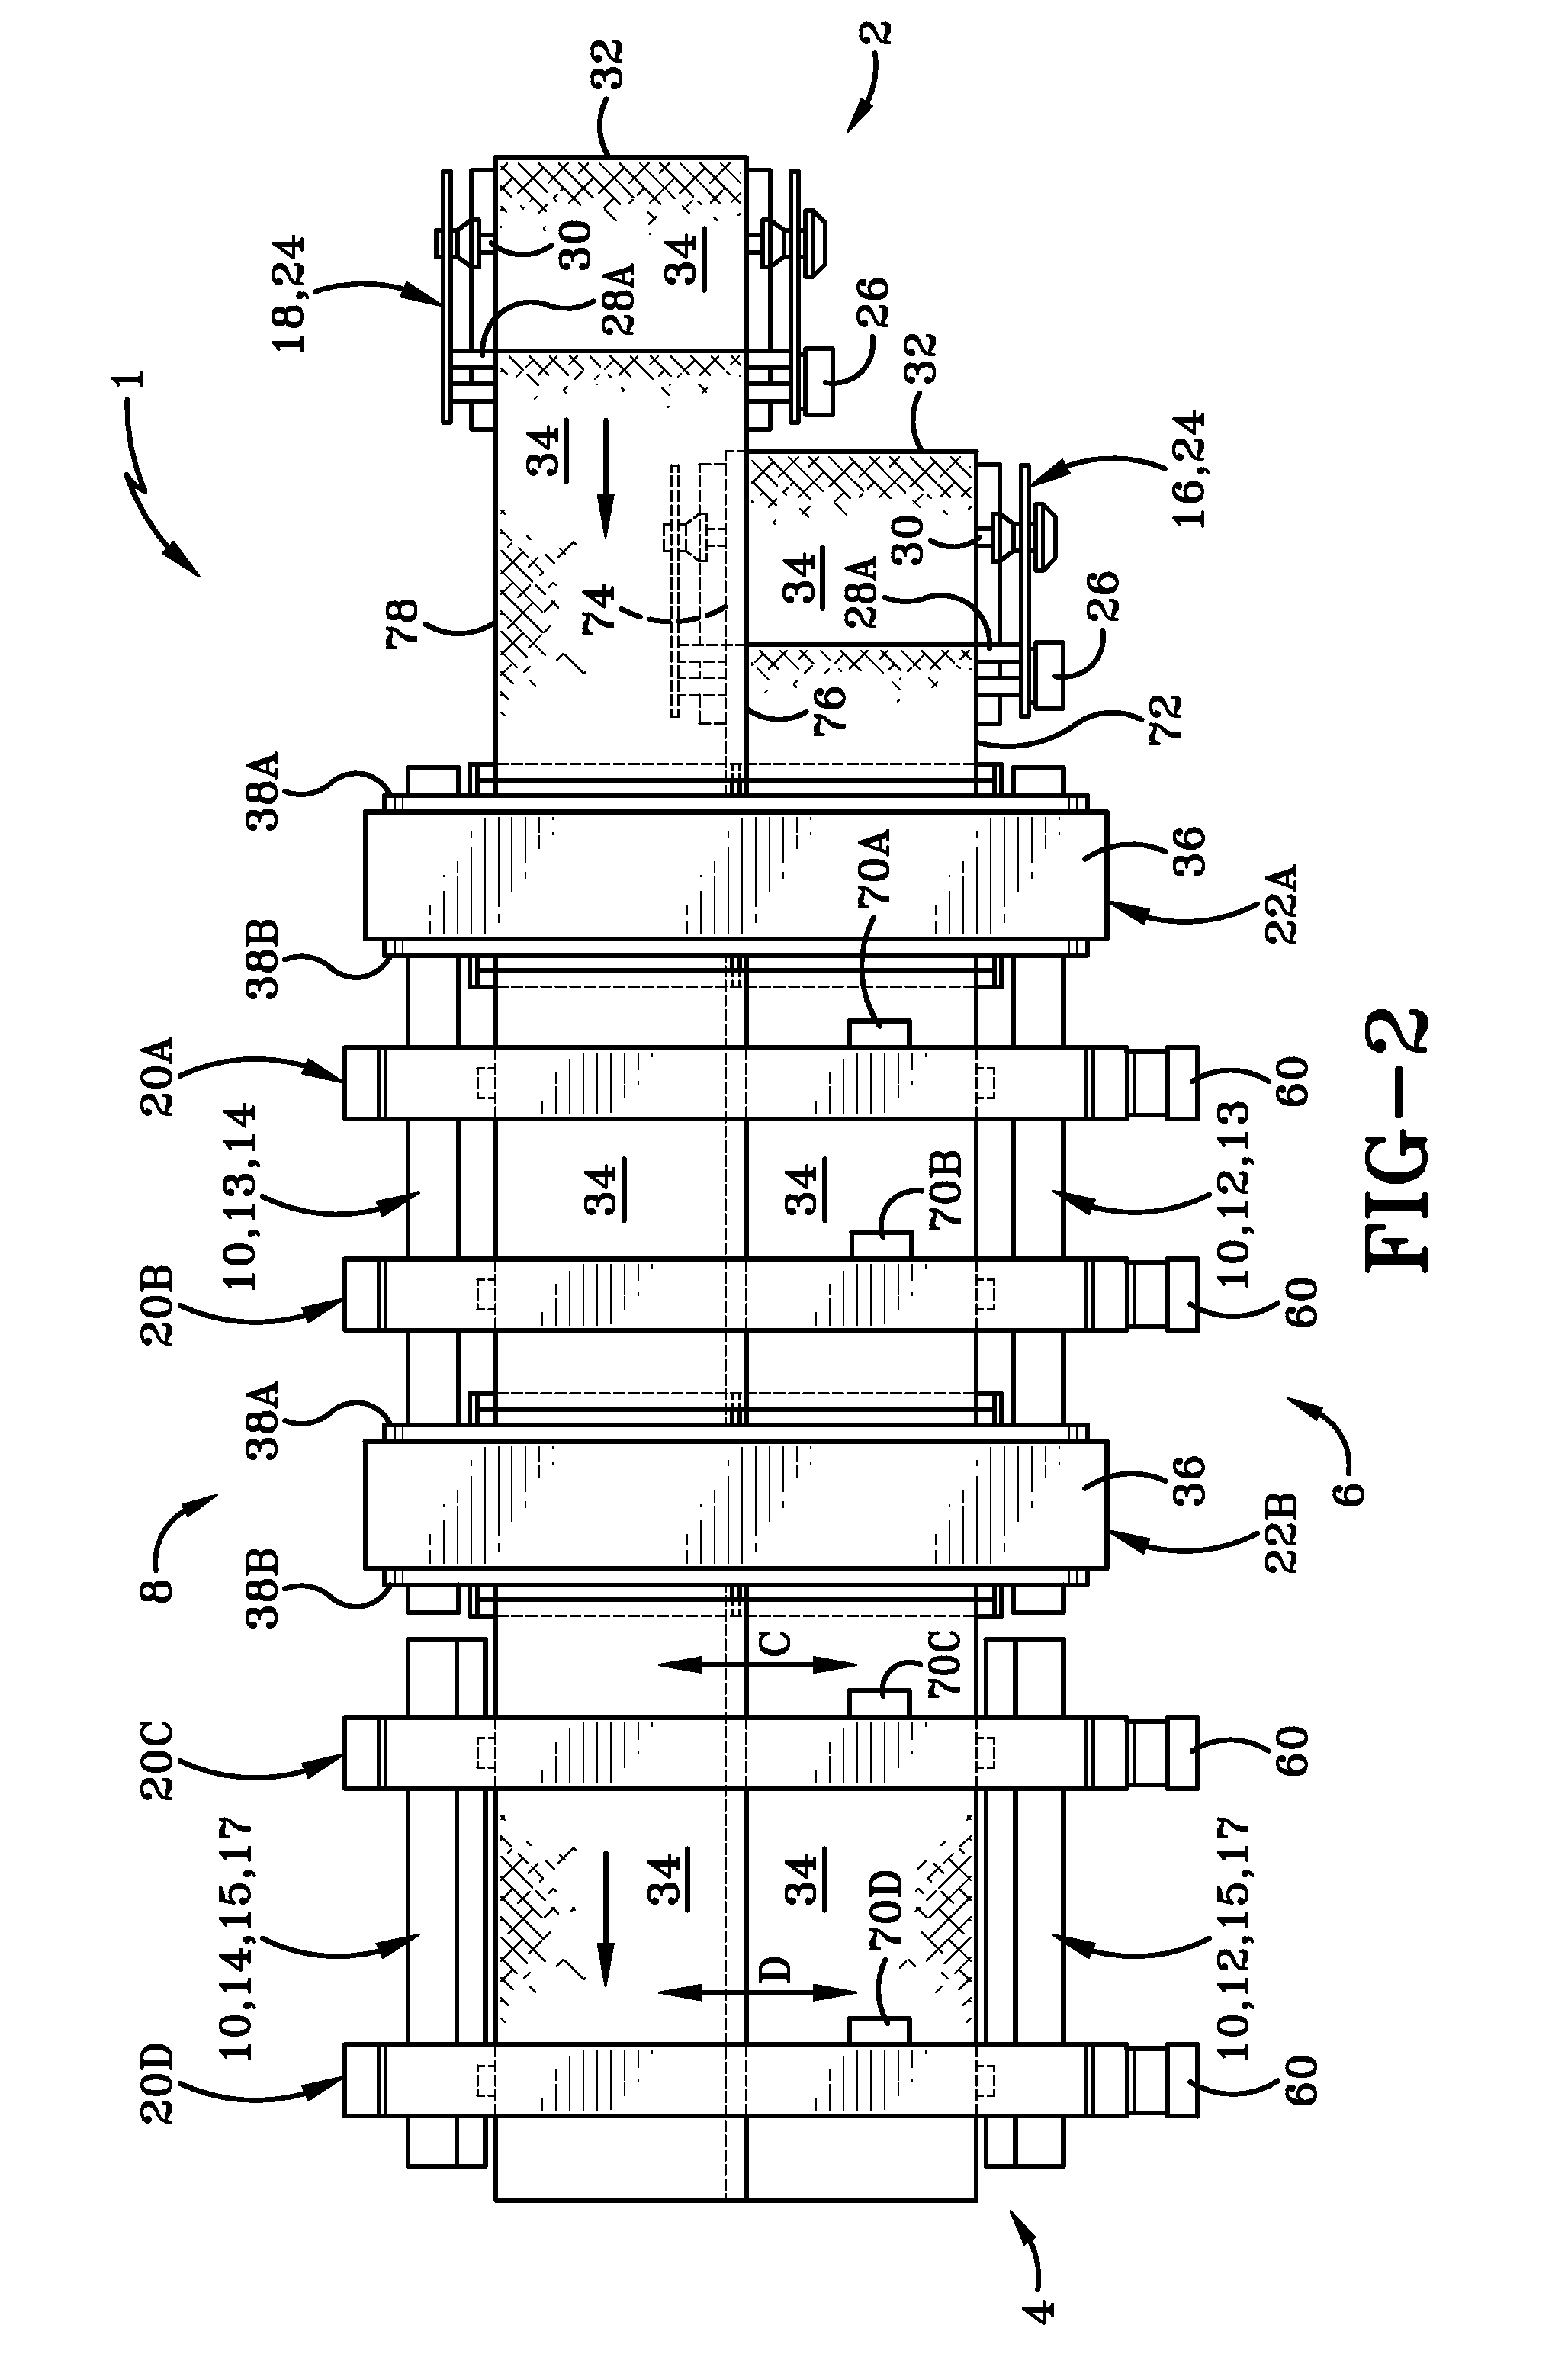 Dual roll fabric welding machine and method of operation